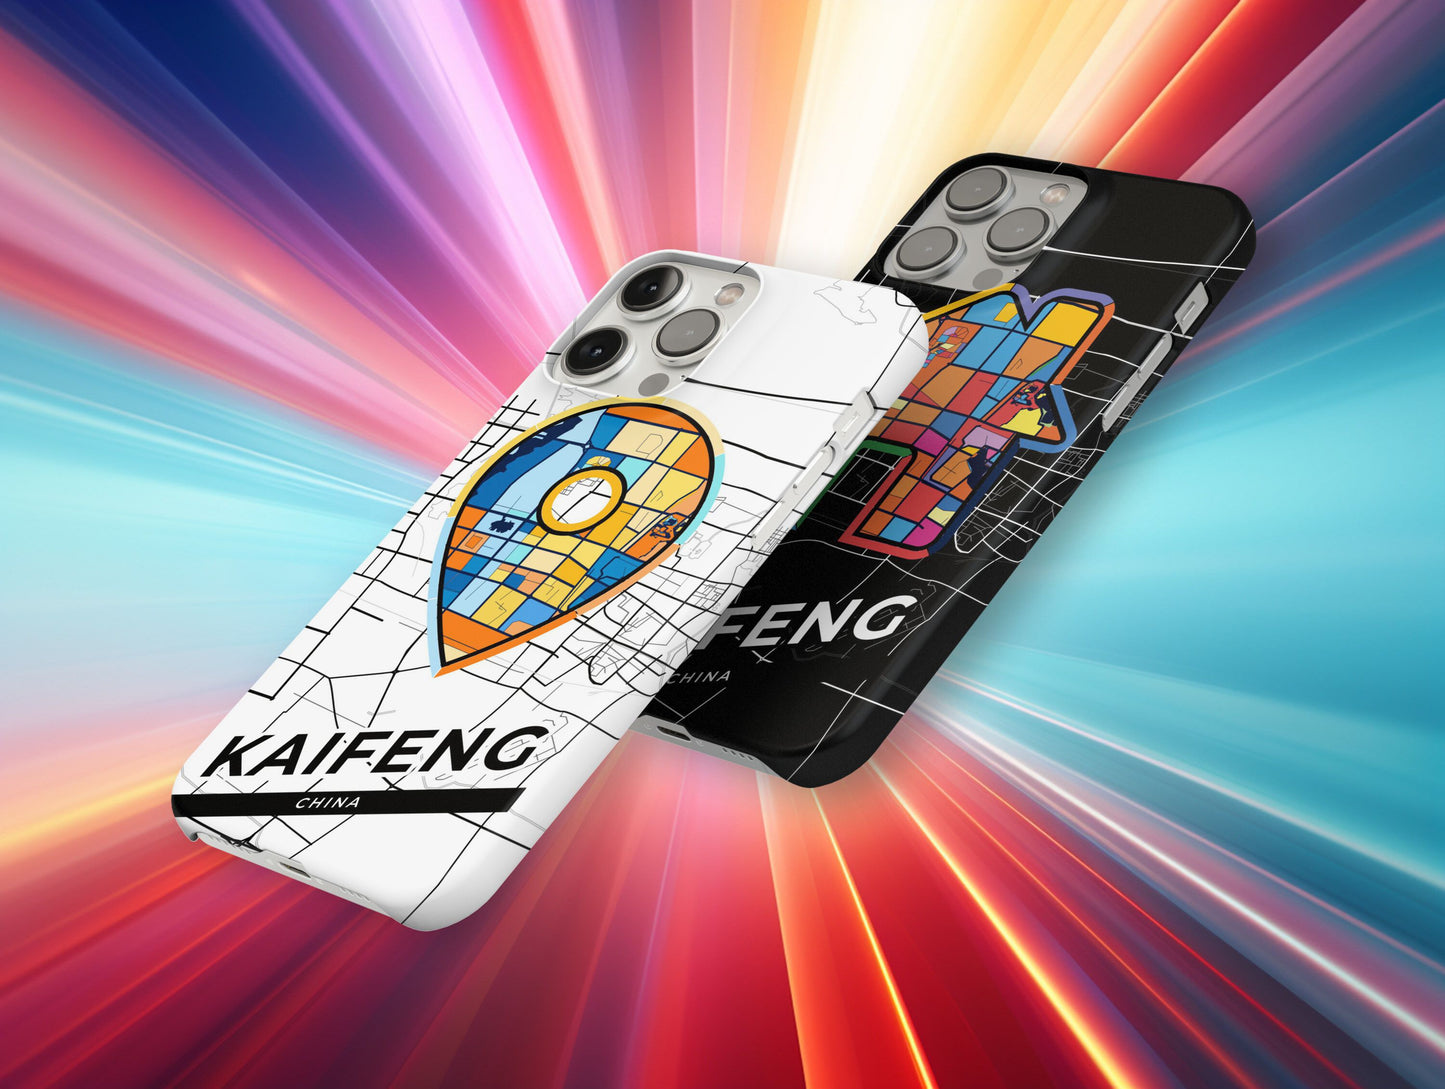 Kaifeng China slim phone case with colorful icon. Birthday, wedding or housewarming gift. Couple match cases.